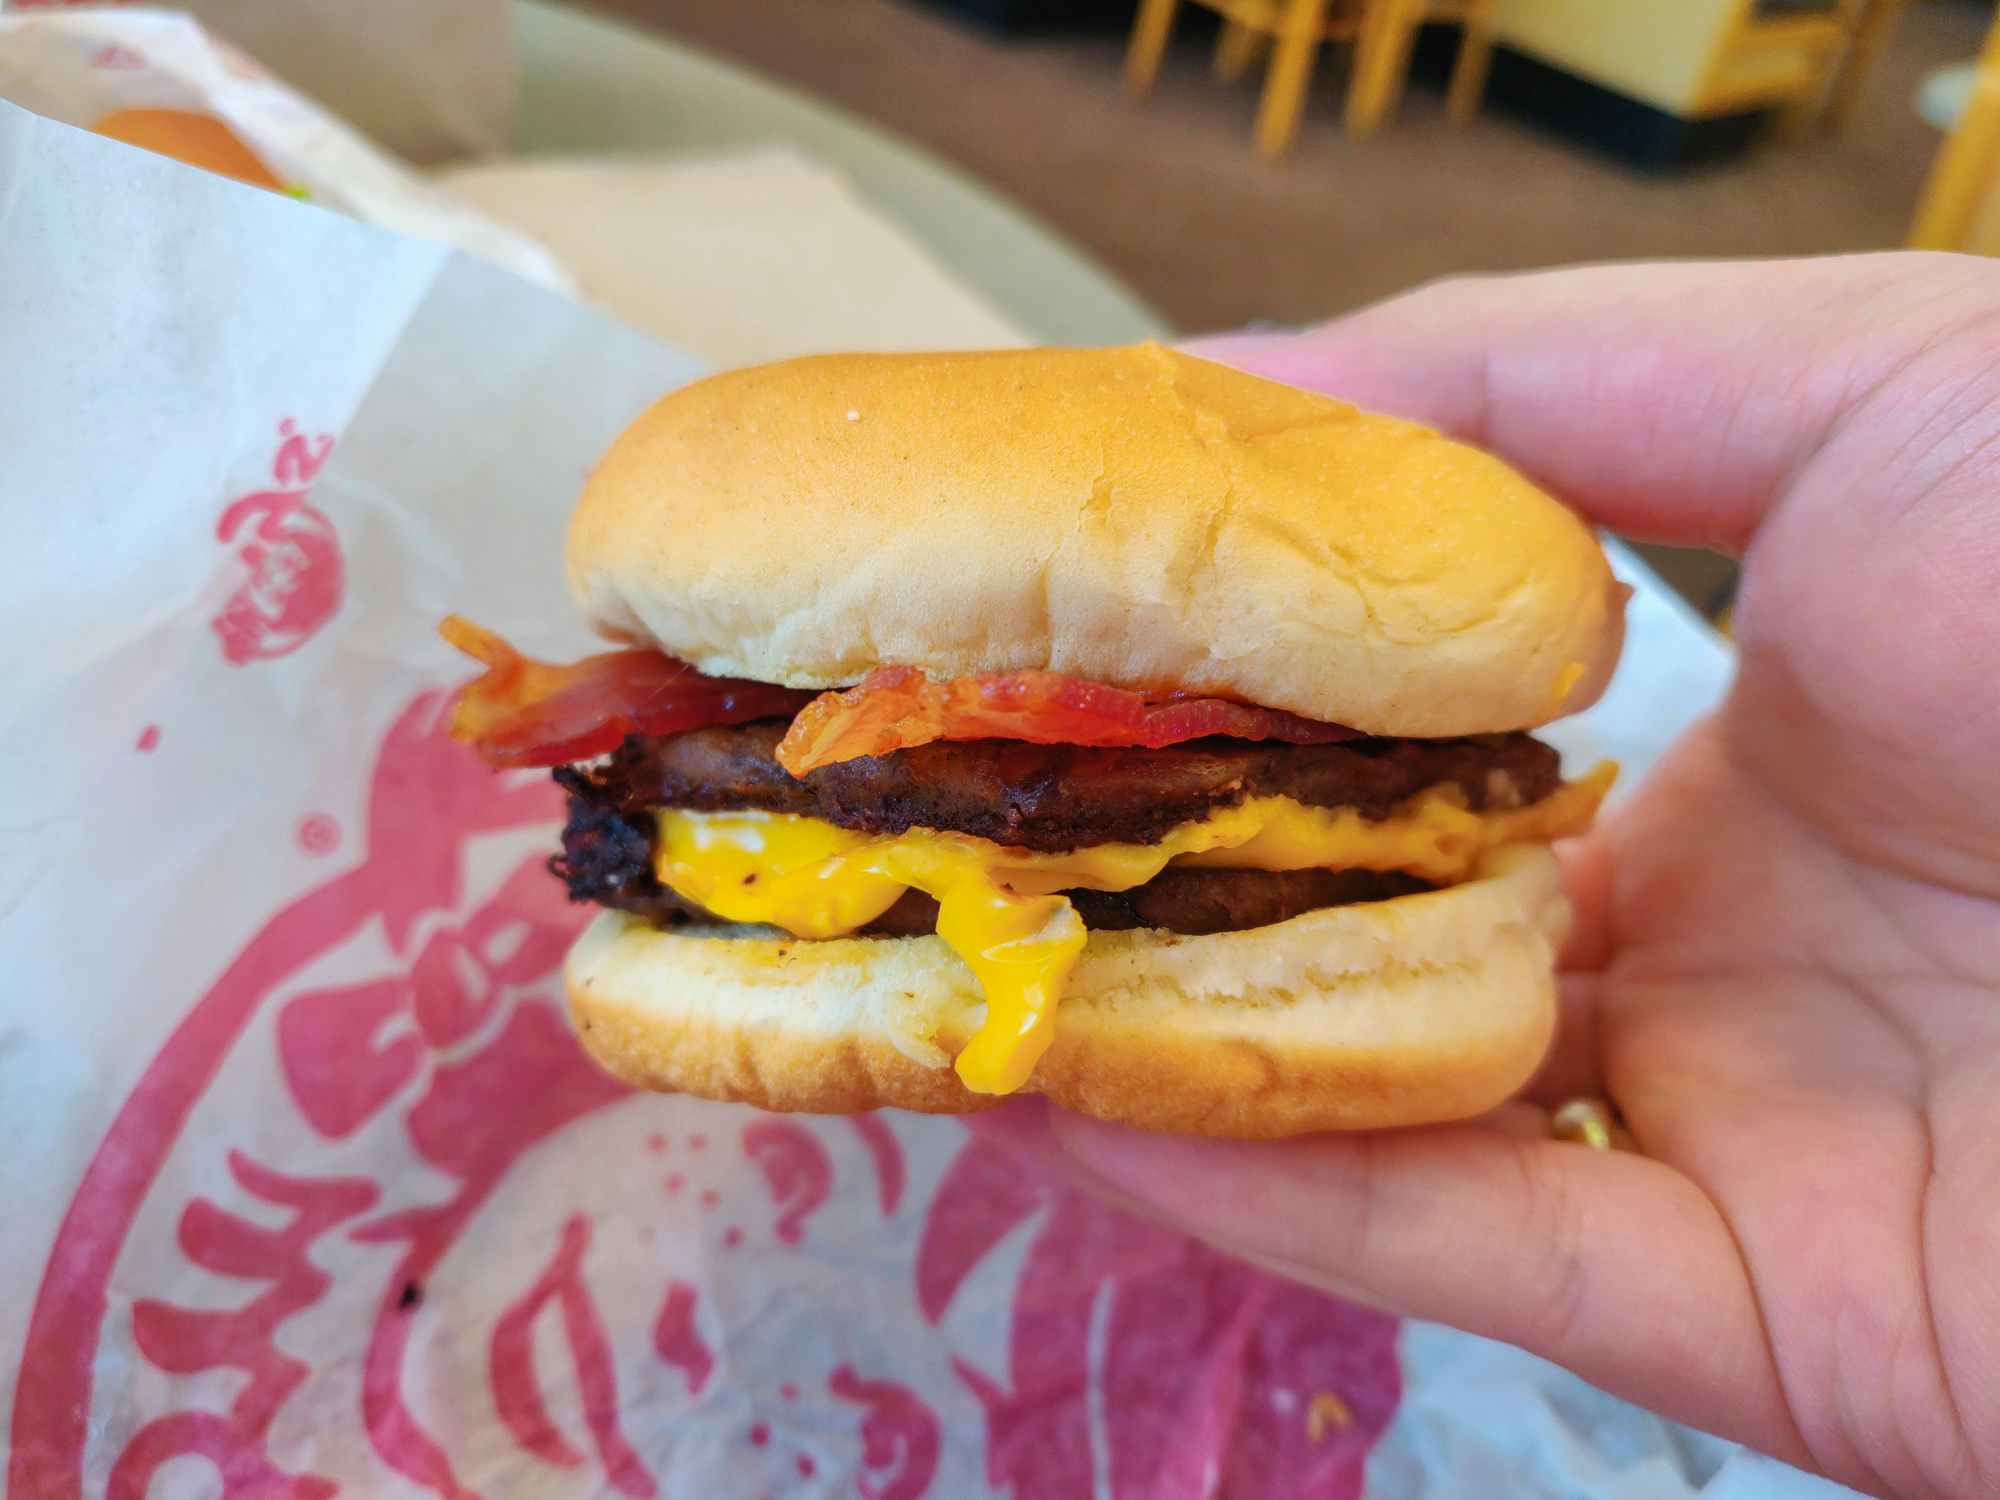 A person's hand holding a Wendy's Bacon Double Stack burger above its paper wrapper.